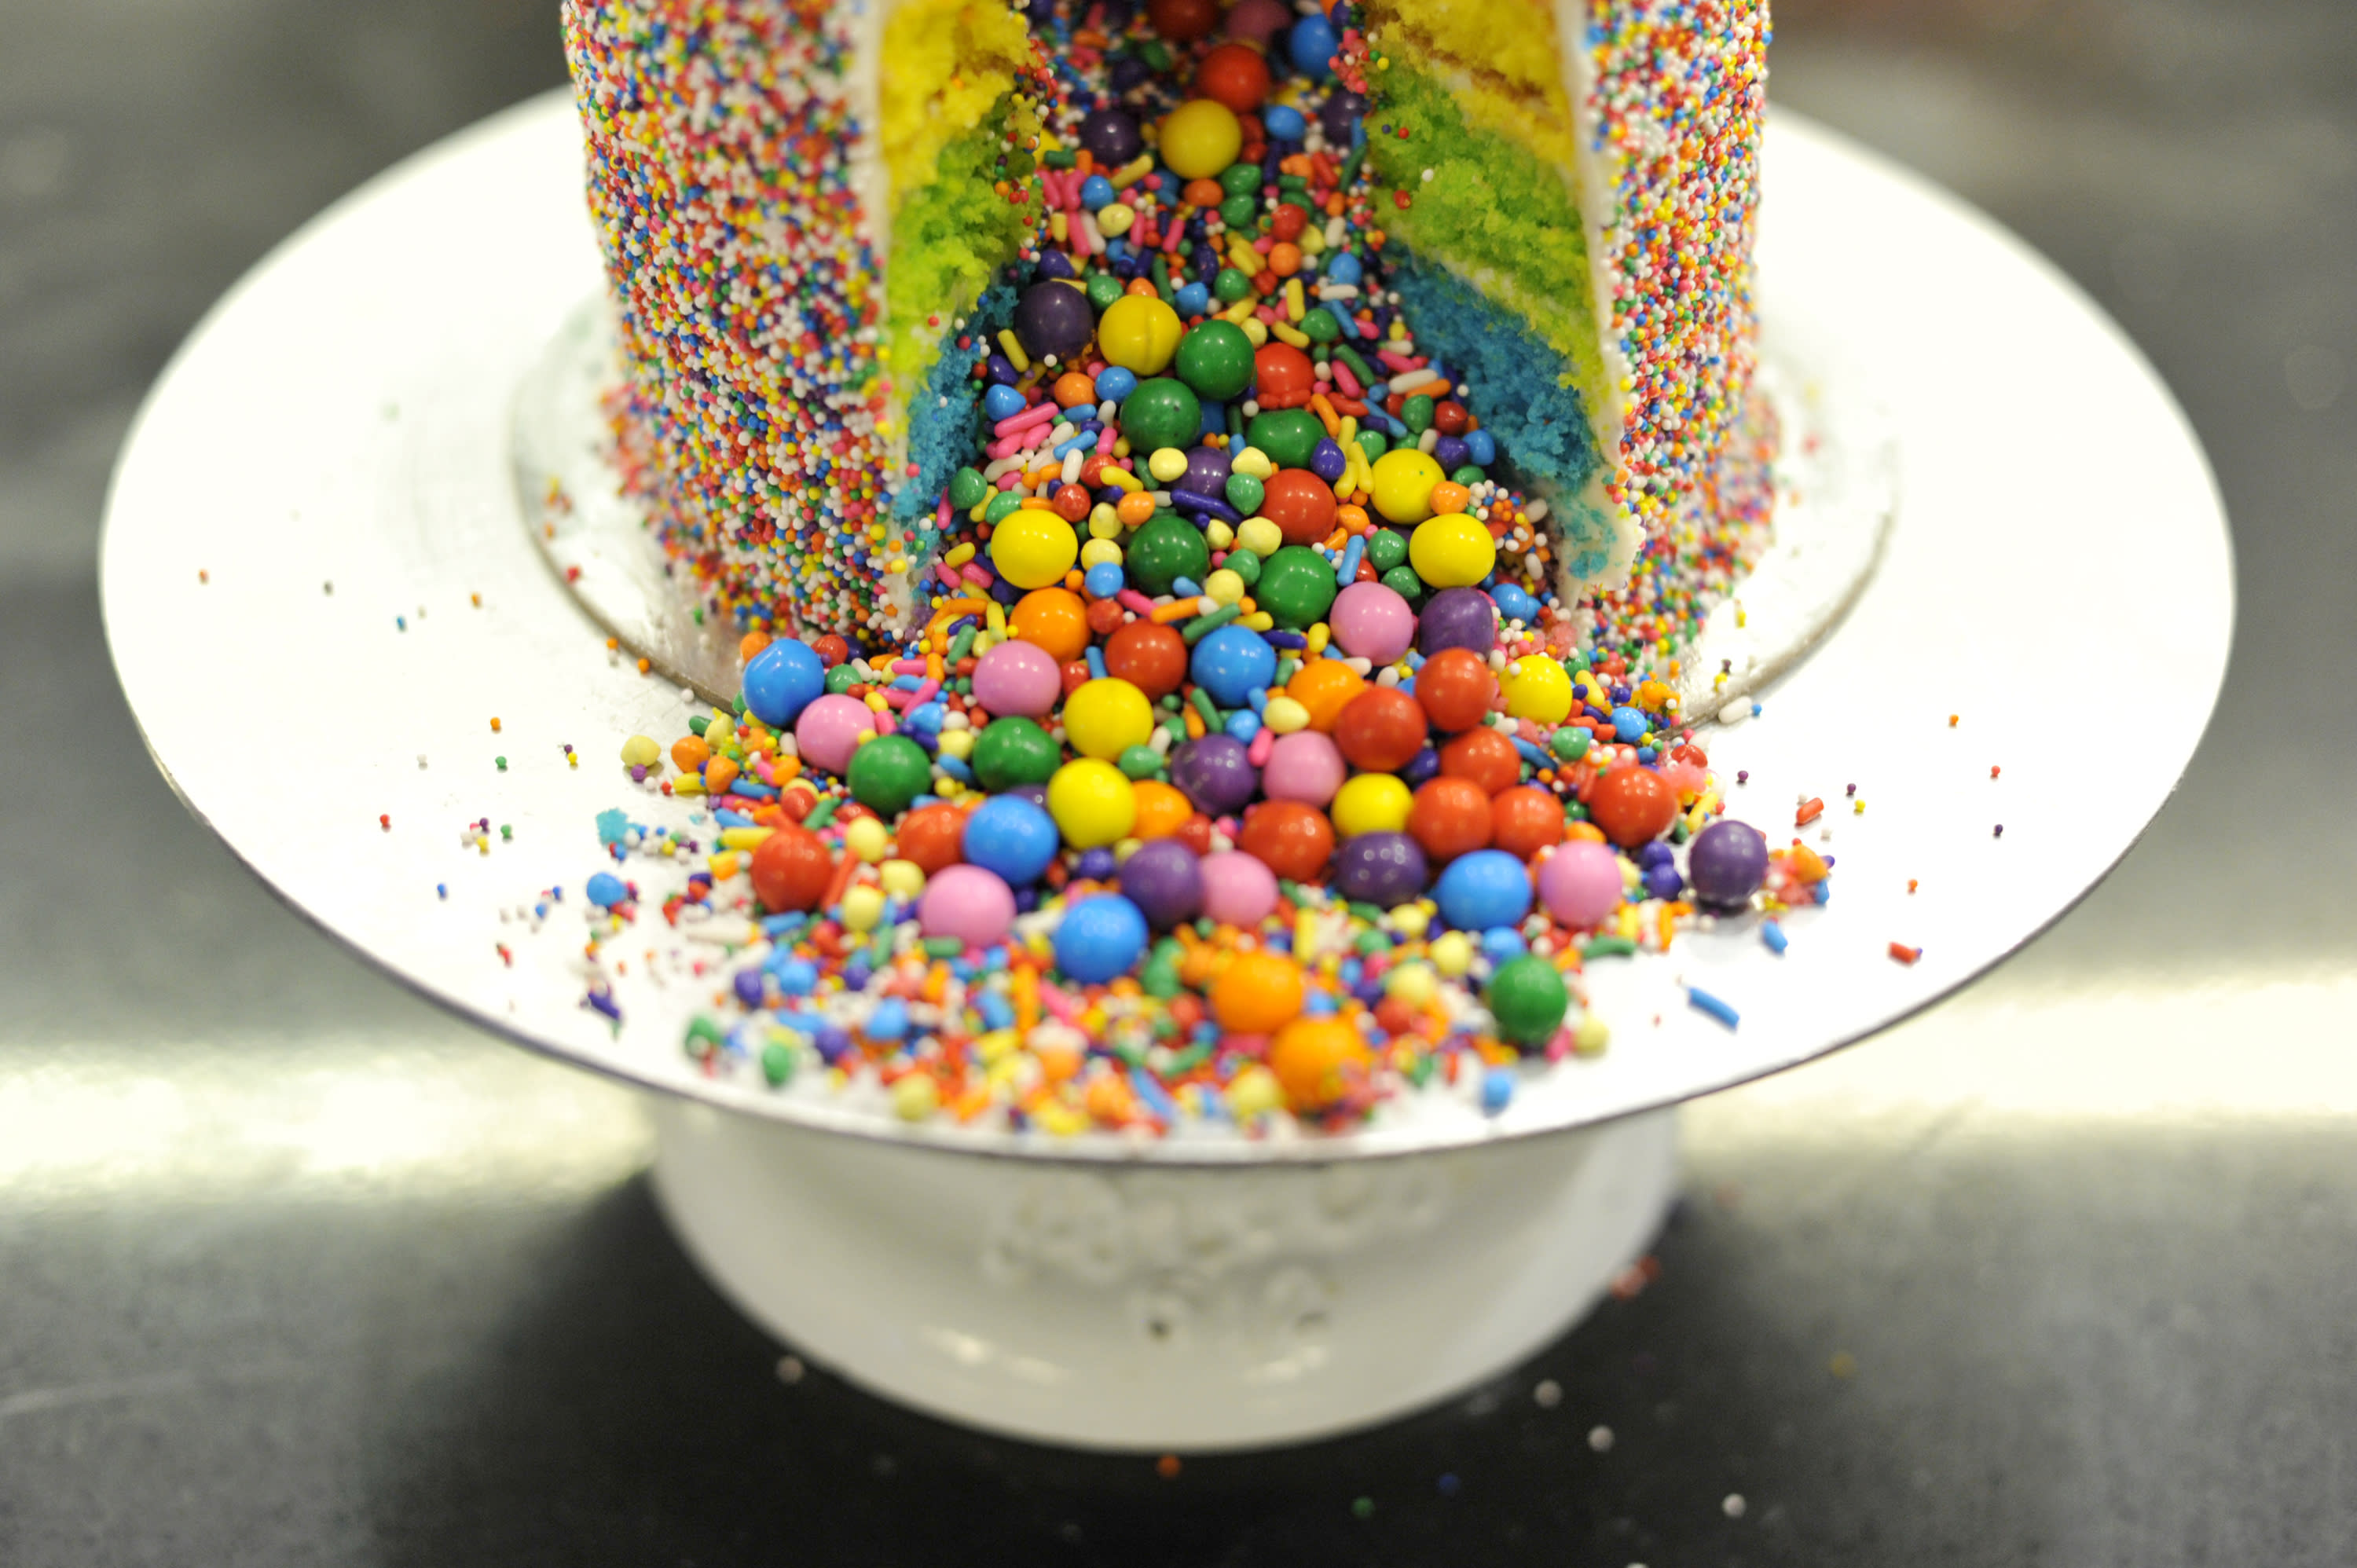 The rainbow birthday explosion cake maker says she was inspired by piñatas - Yahoo Finance